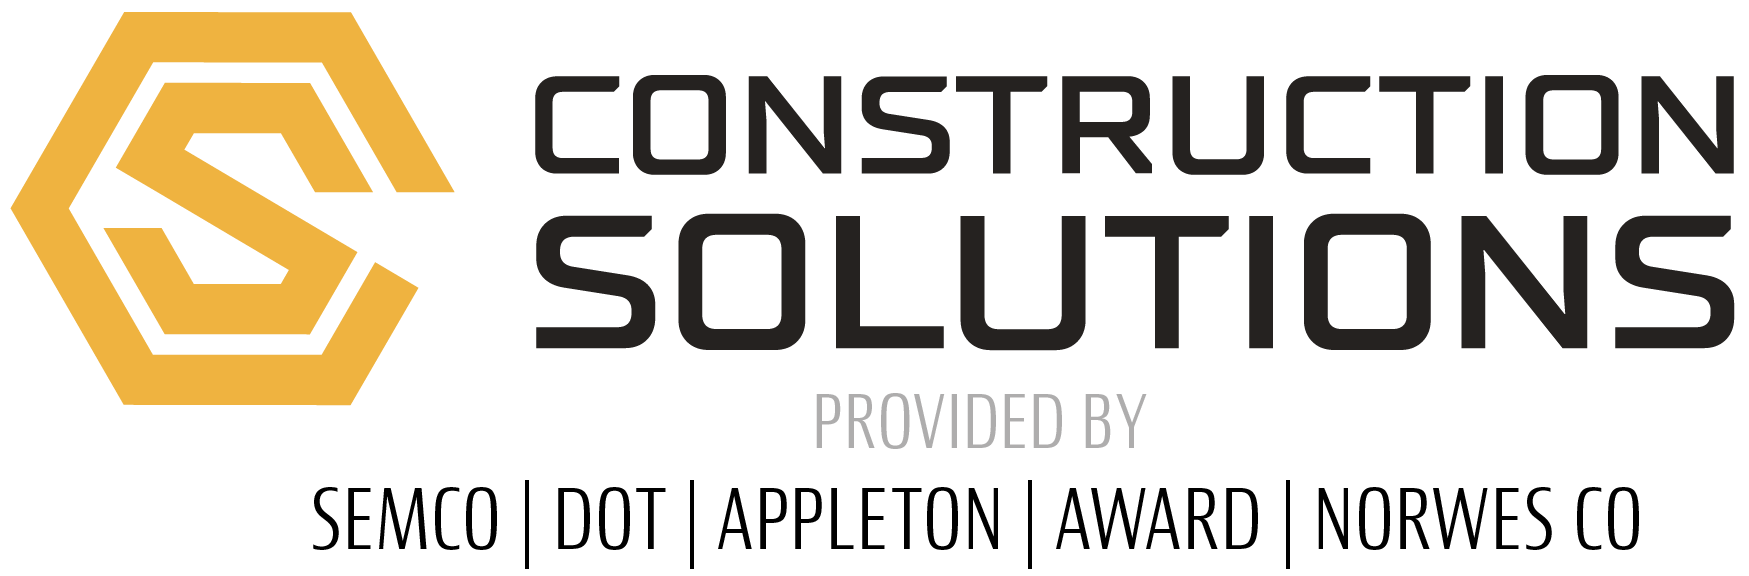 Construction Solutions  - Provided by Logo